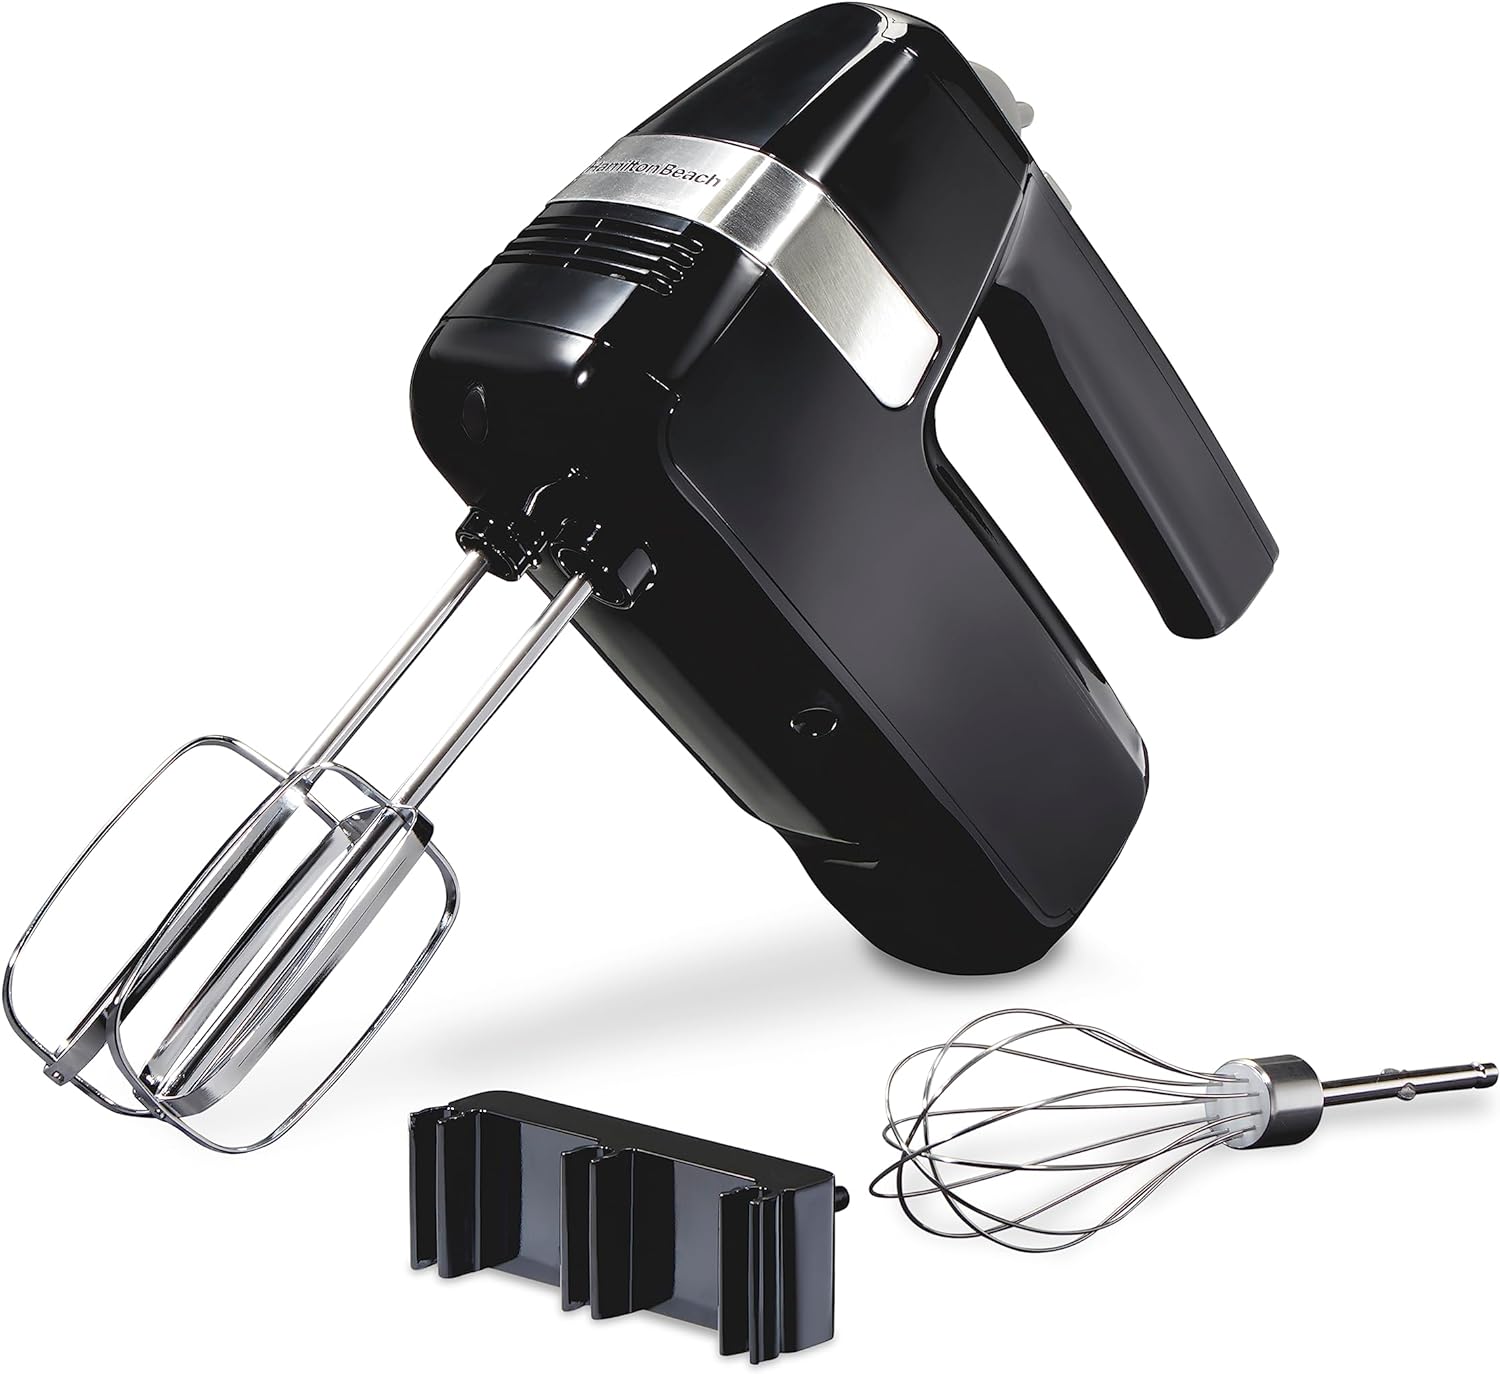 Hamilton Beach Electric Hand Mixer, 6 Speeds + Stir Button, 300 Watts of Peak Power for Powerful Mixing, Includes Whisk and Storage Clip, Black (62628)